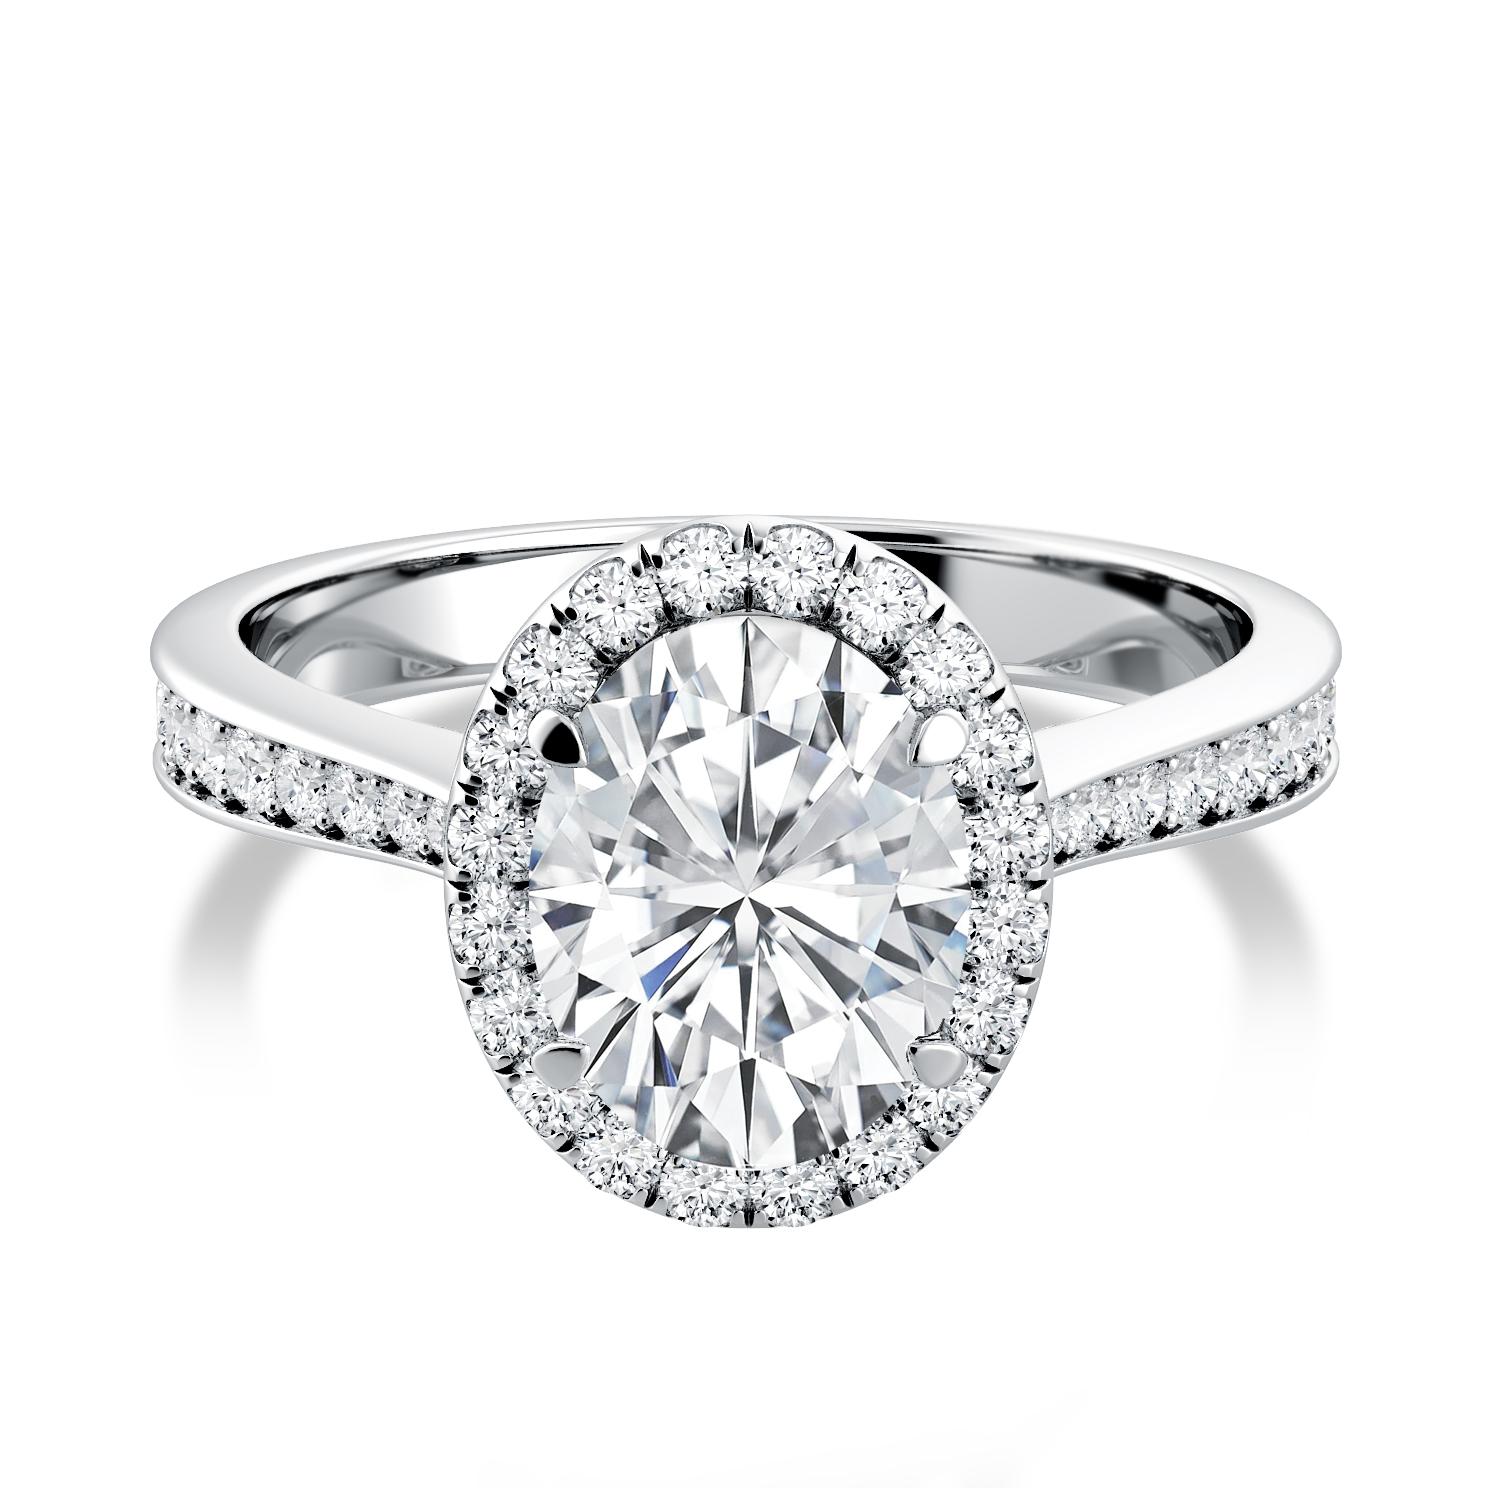 Empire Oval Cut Diamond GIA Certified Engagement Anniversary 950 Platinum For Sale